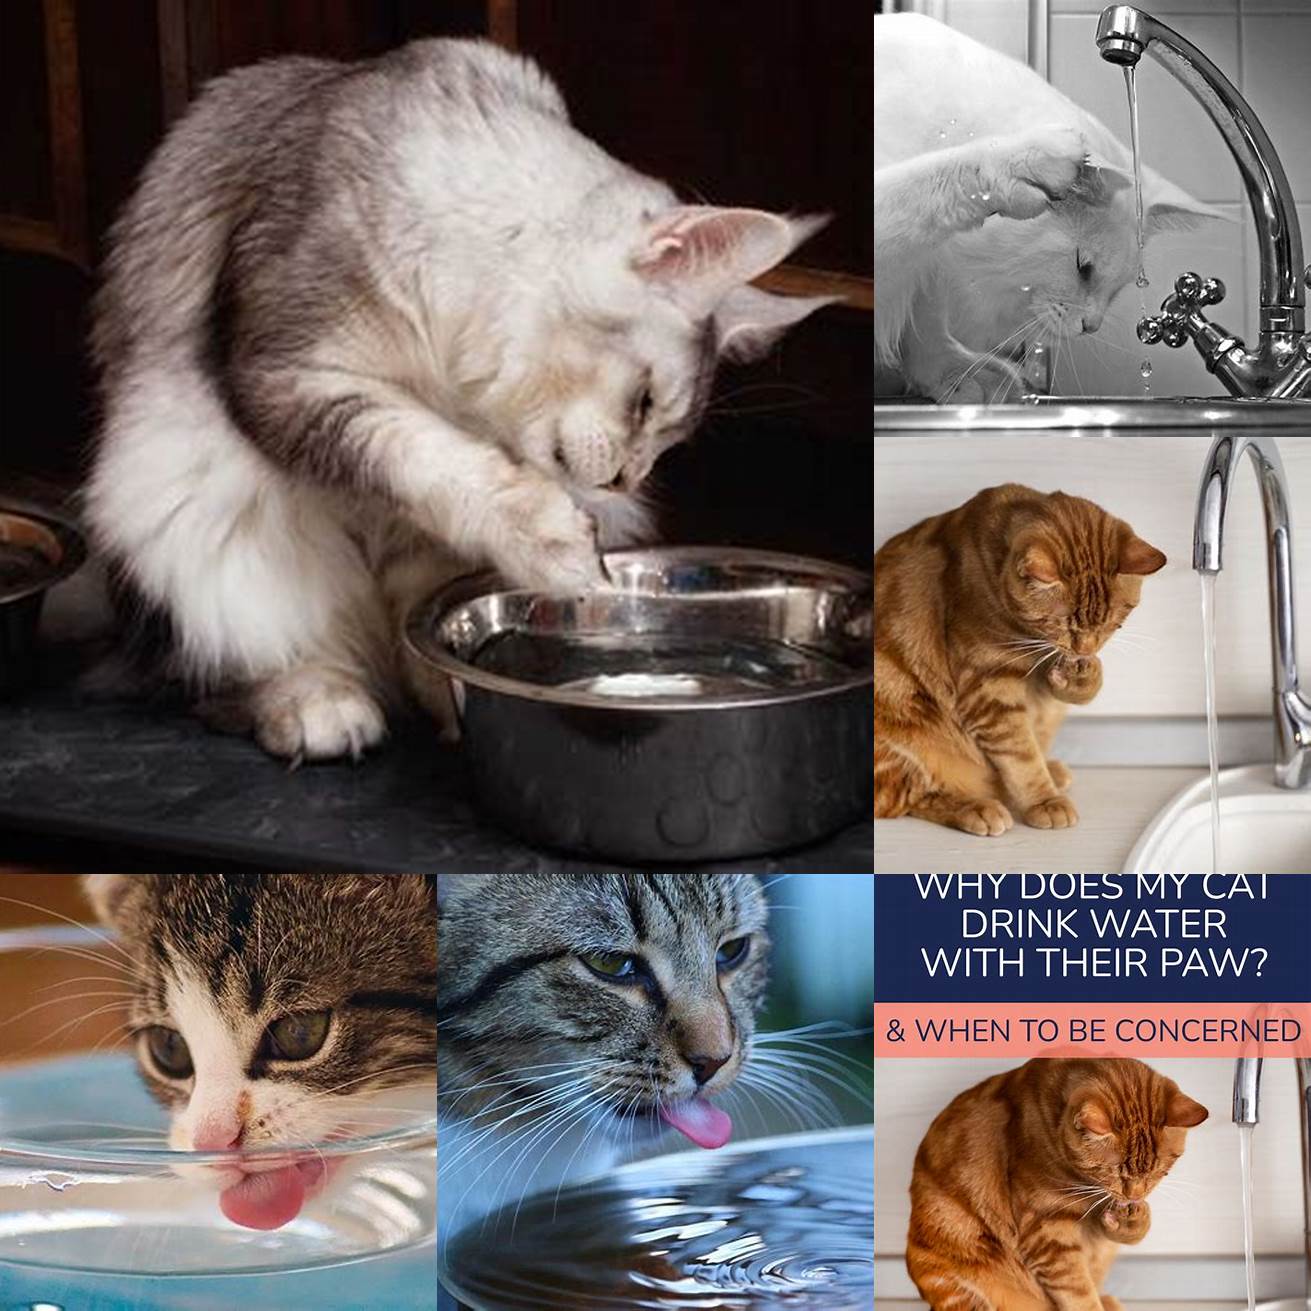 Some cats may also drink water with their paws because of a behavioral or medical issue